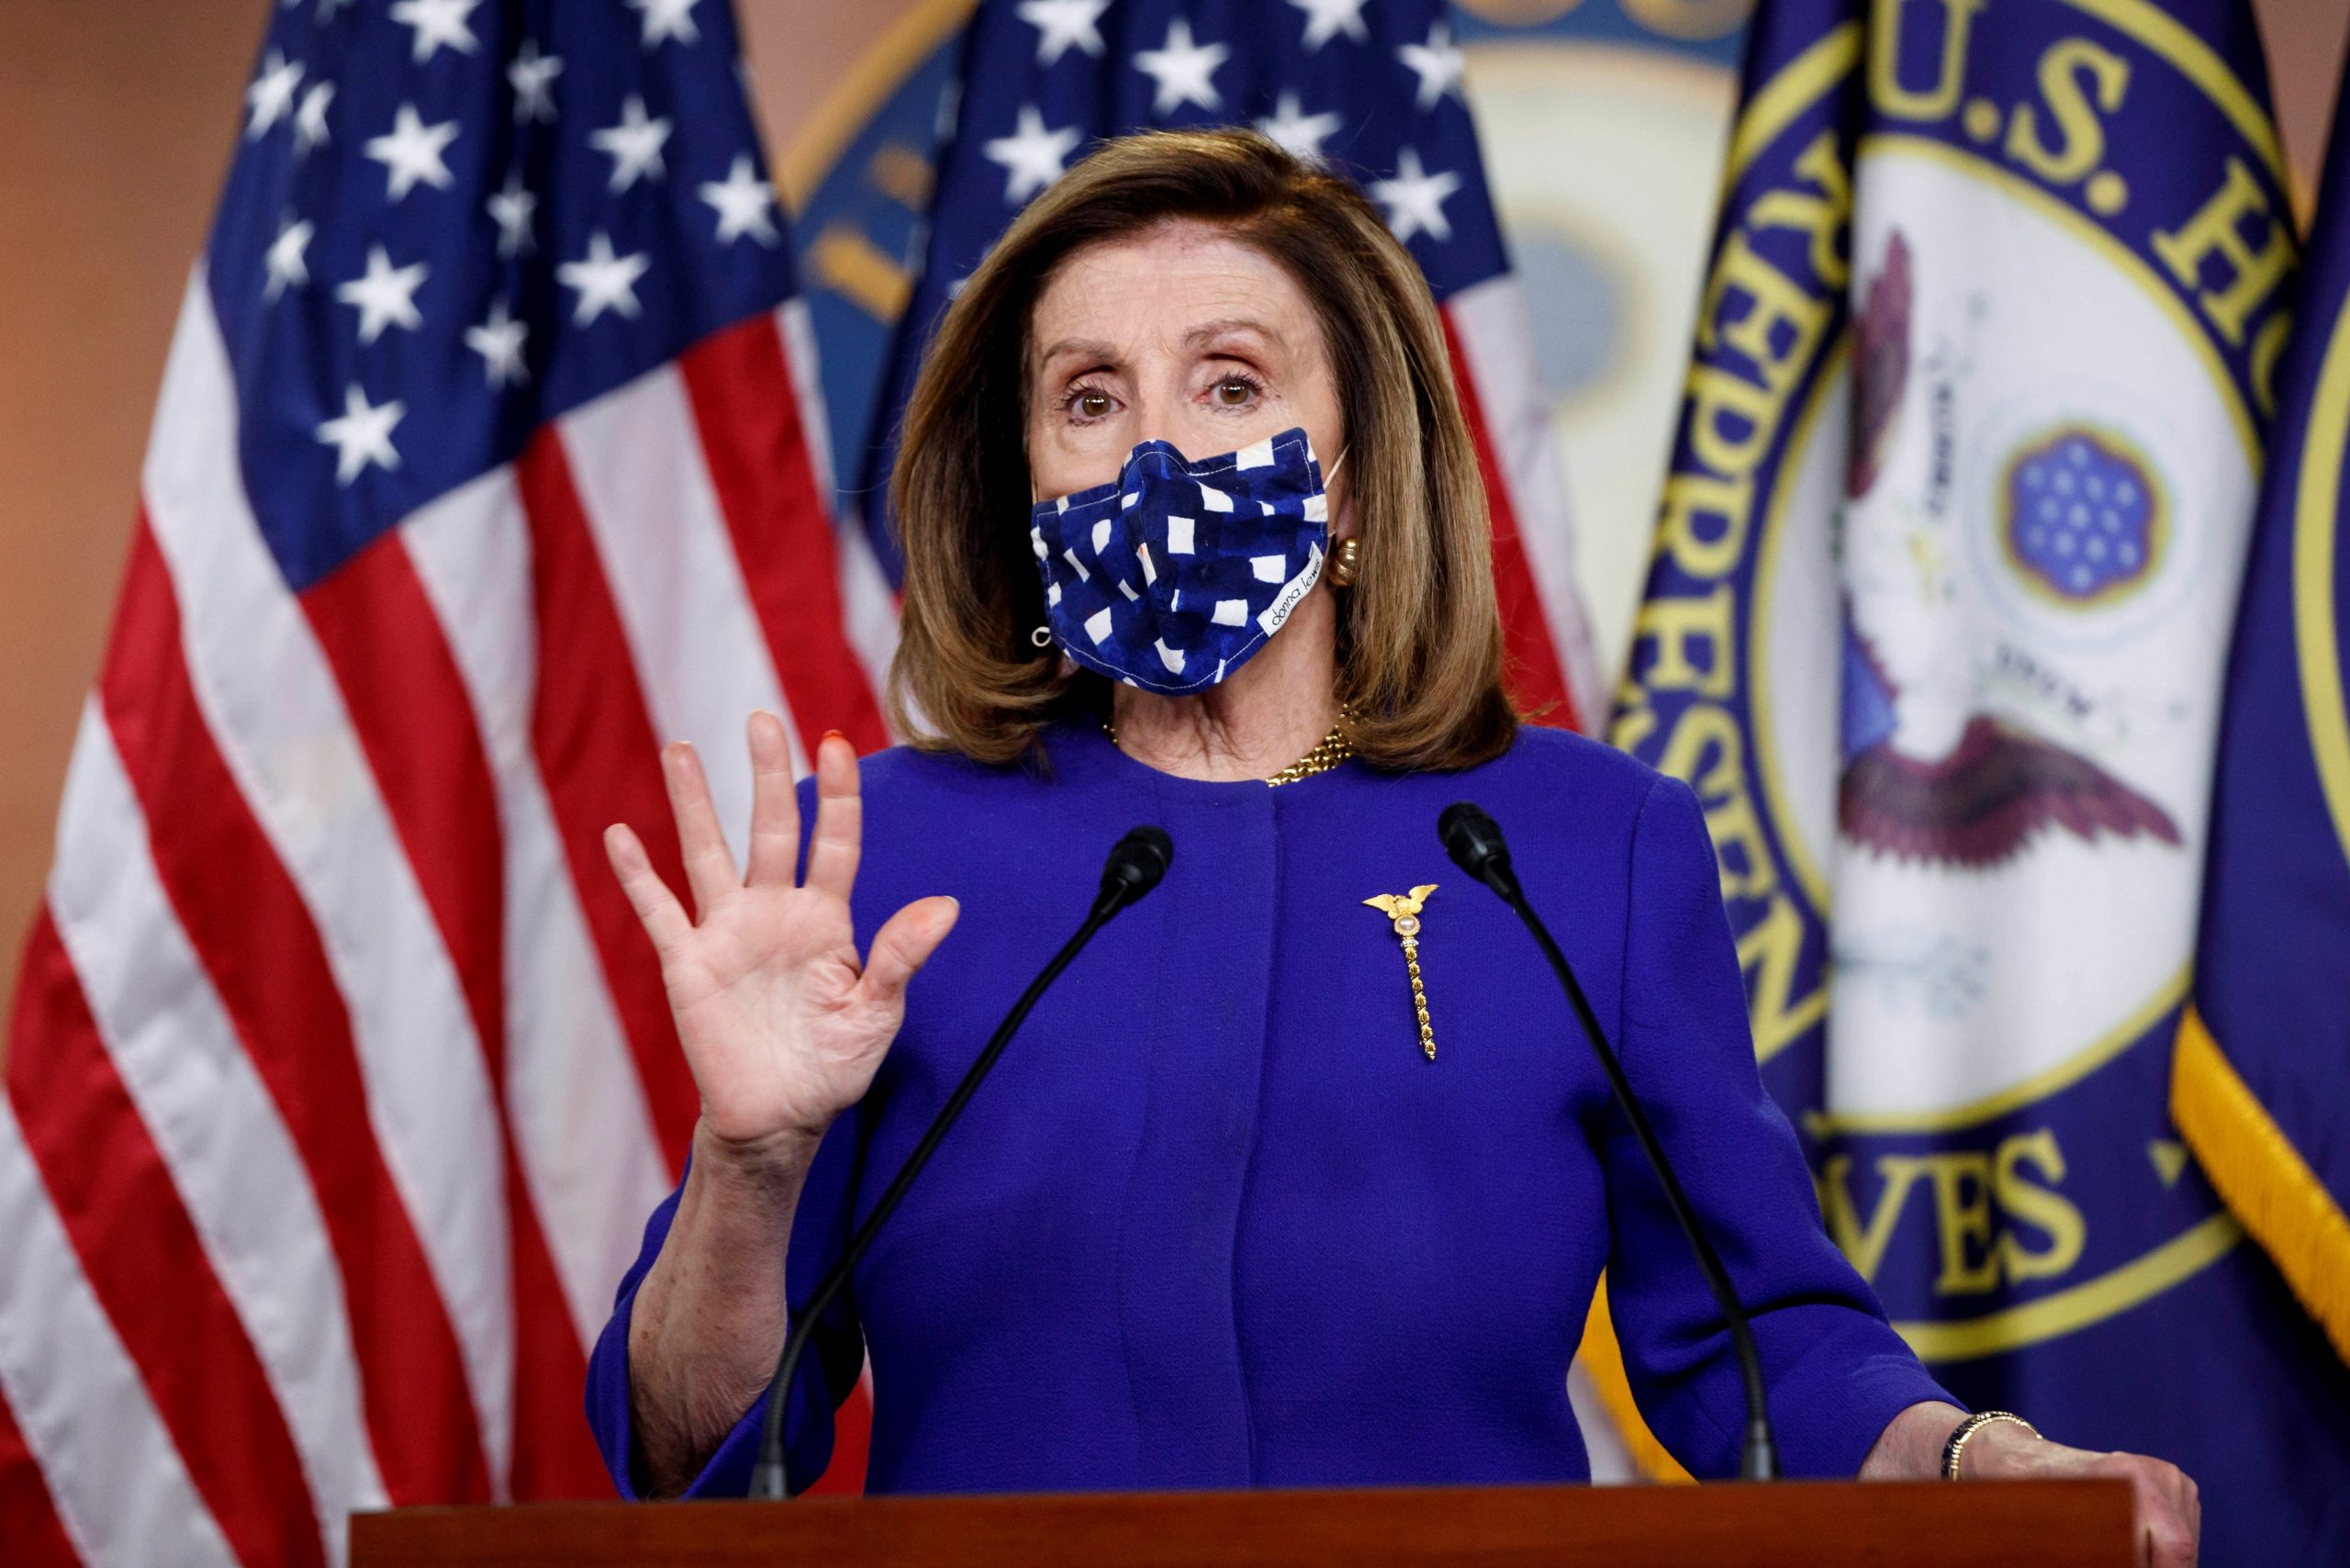 Pelosi units 48-hour deadline to succeed in coronavirus stimulus deal earlier than election